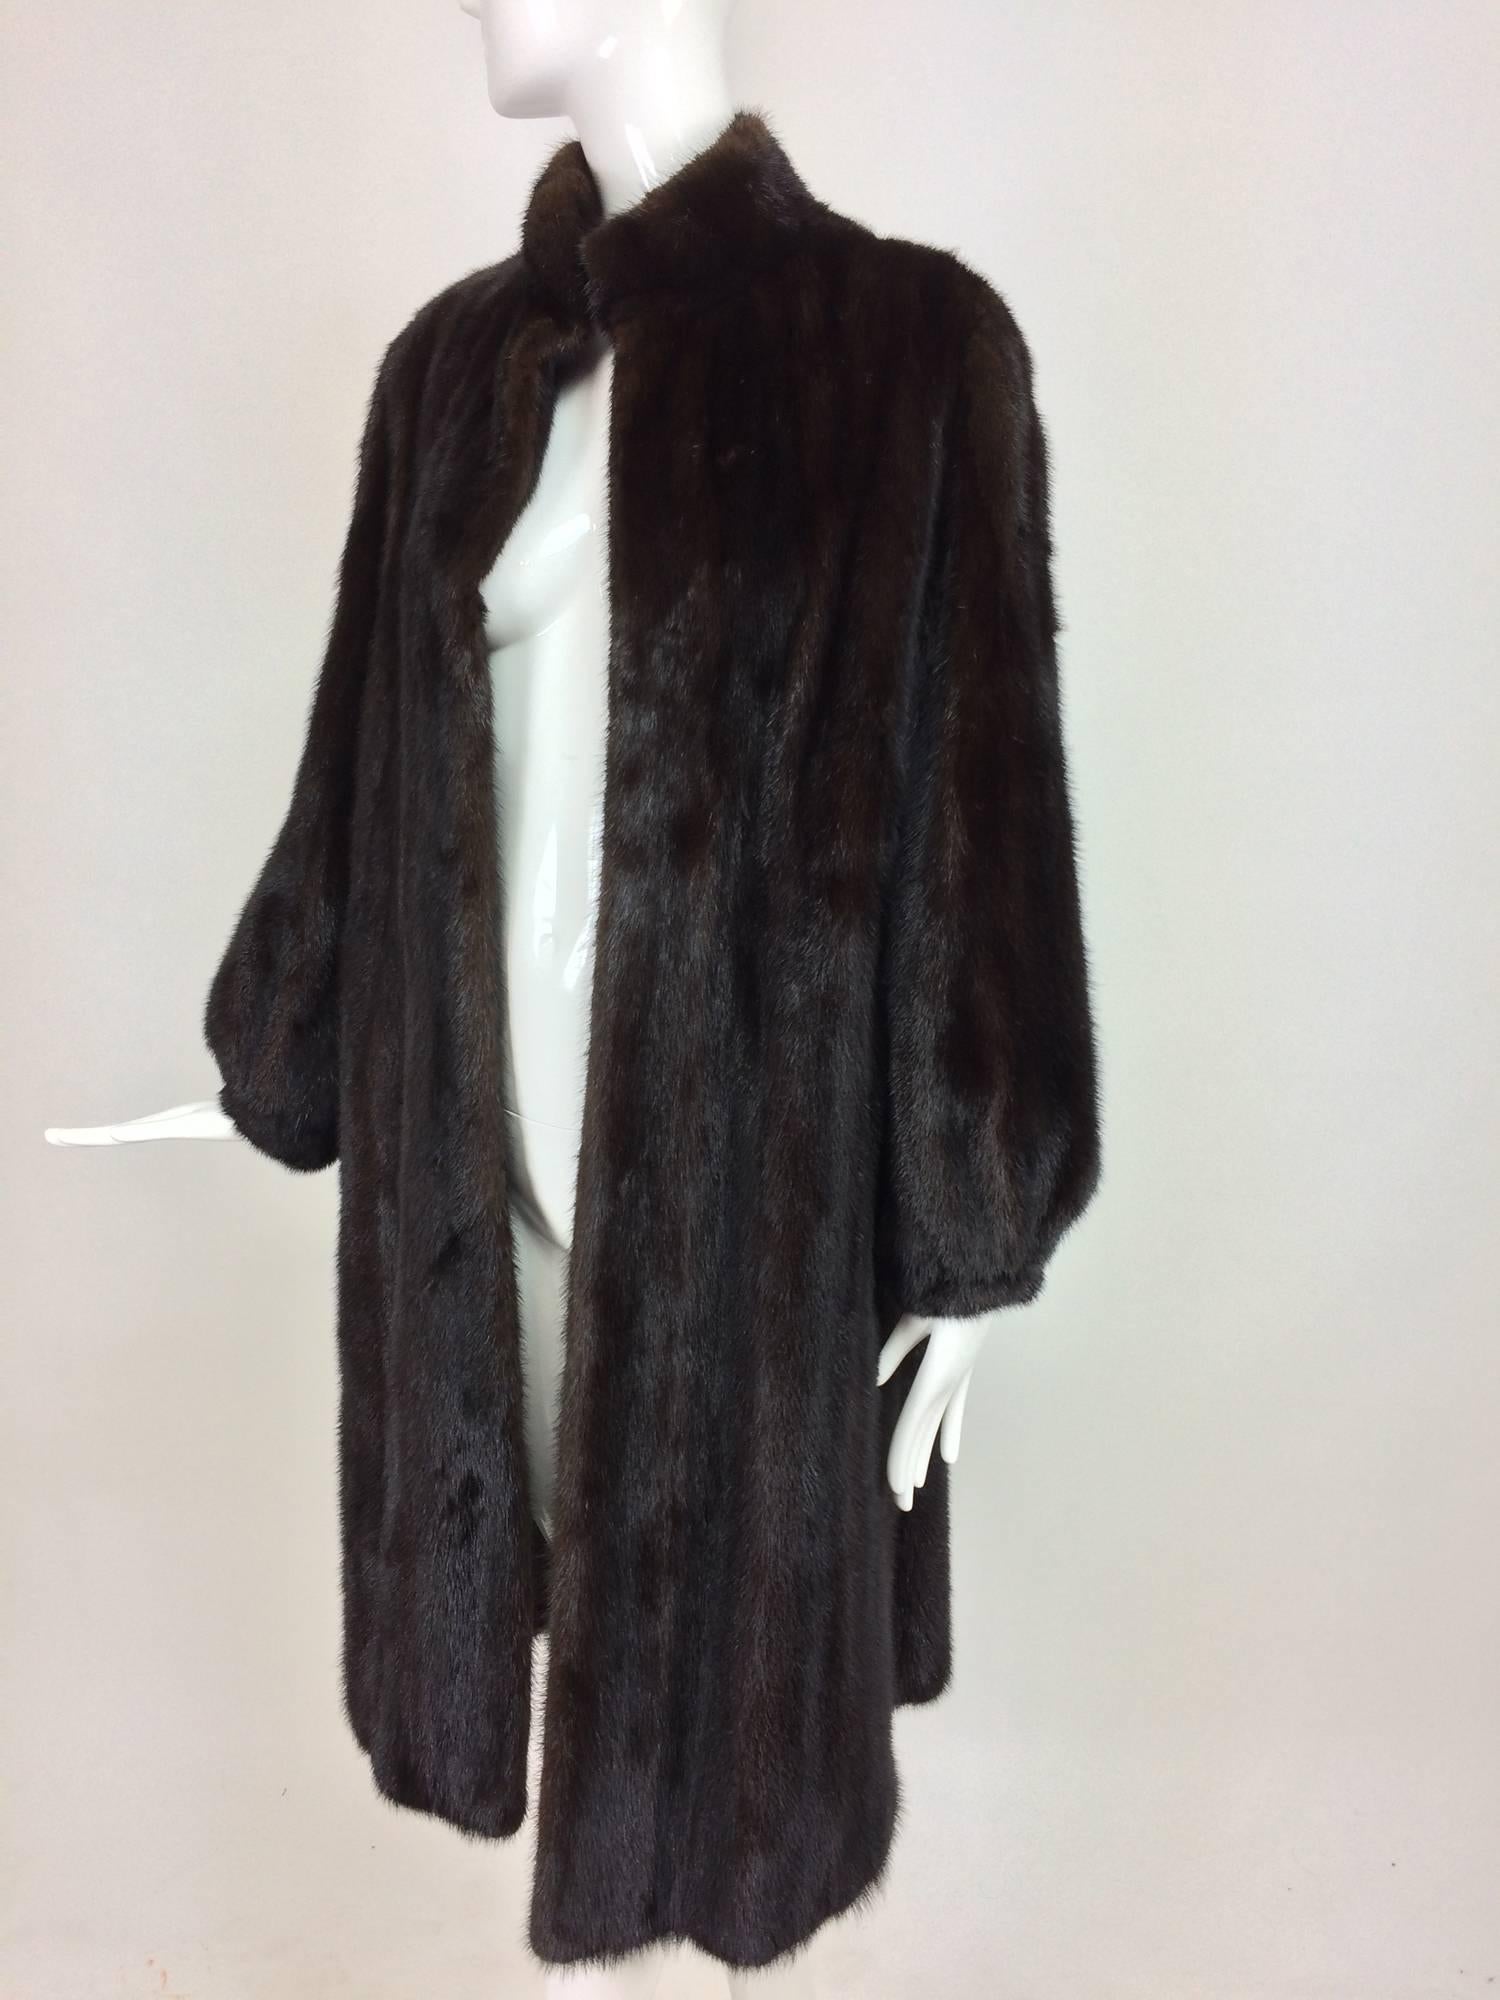 Women's Full length lustrous dark mink coat with gathered cuffs 1960s